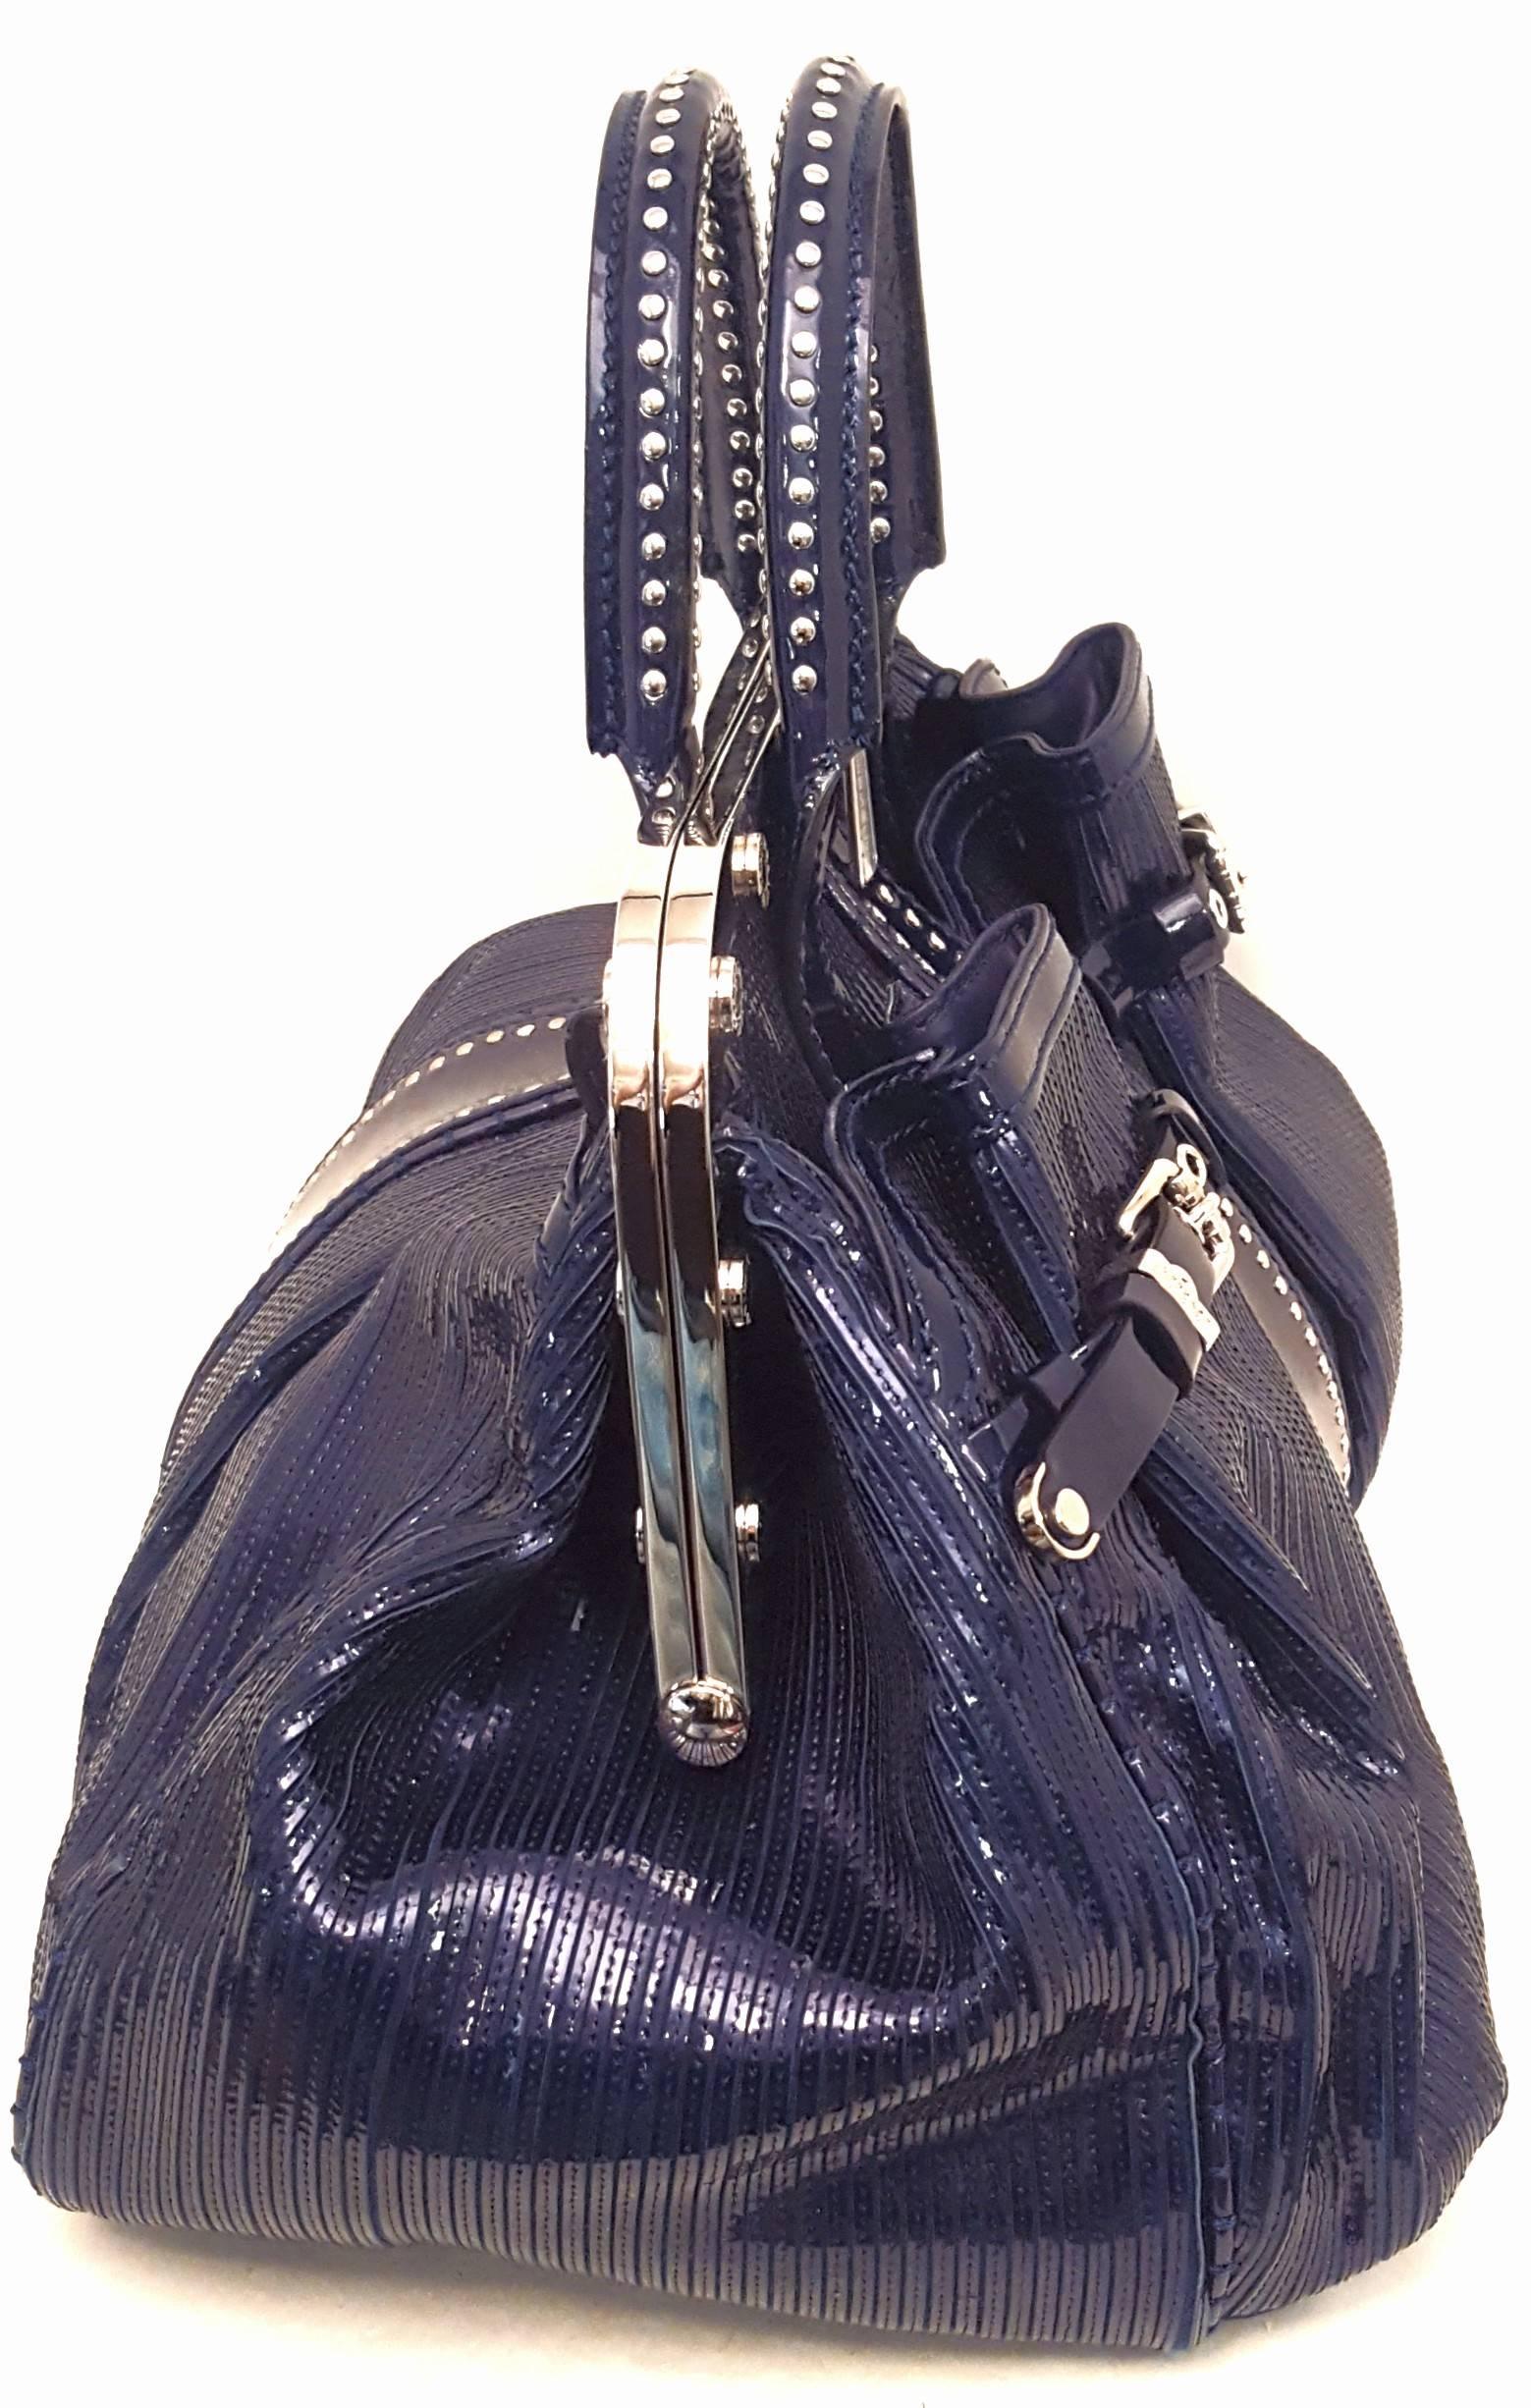 Versace limited edition blue Glitz patent leather satchel with two top handles and removable shoulder strap is so fashionably consistent with the Versace criteria!  This satchel features its silvertone hardware on the top handle mini studs, on the